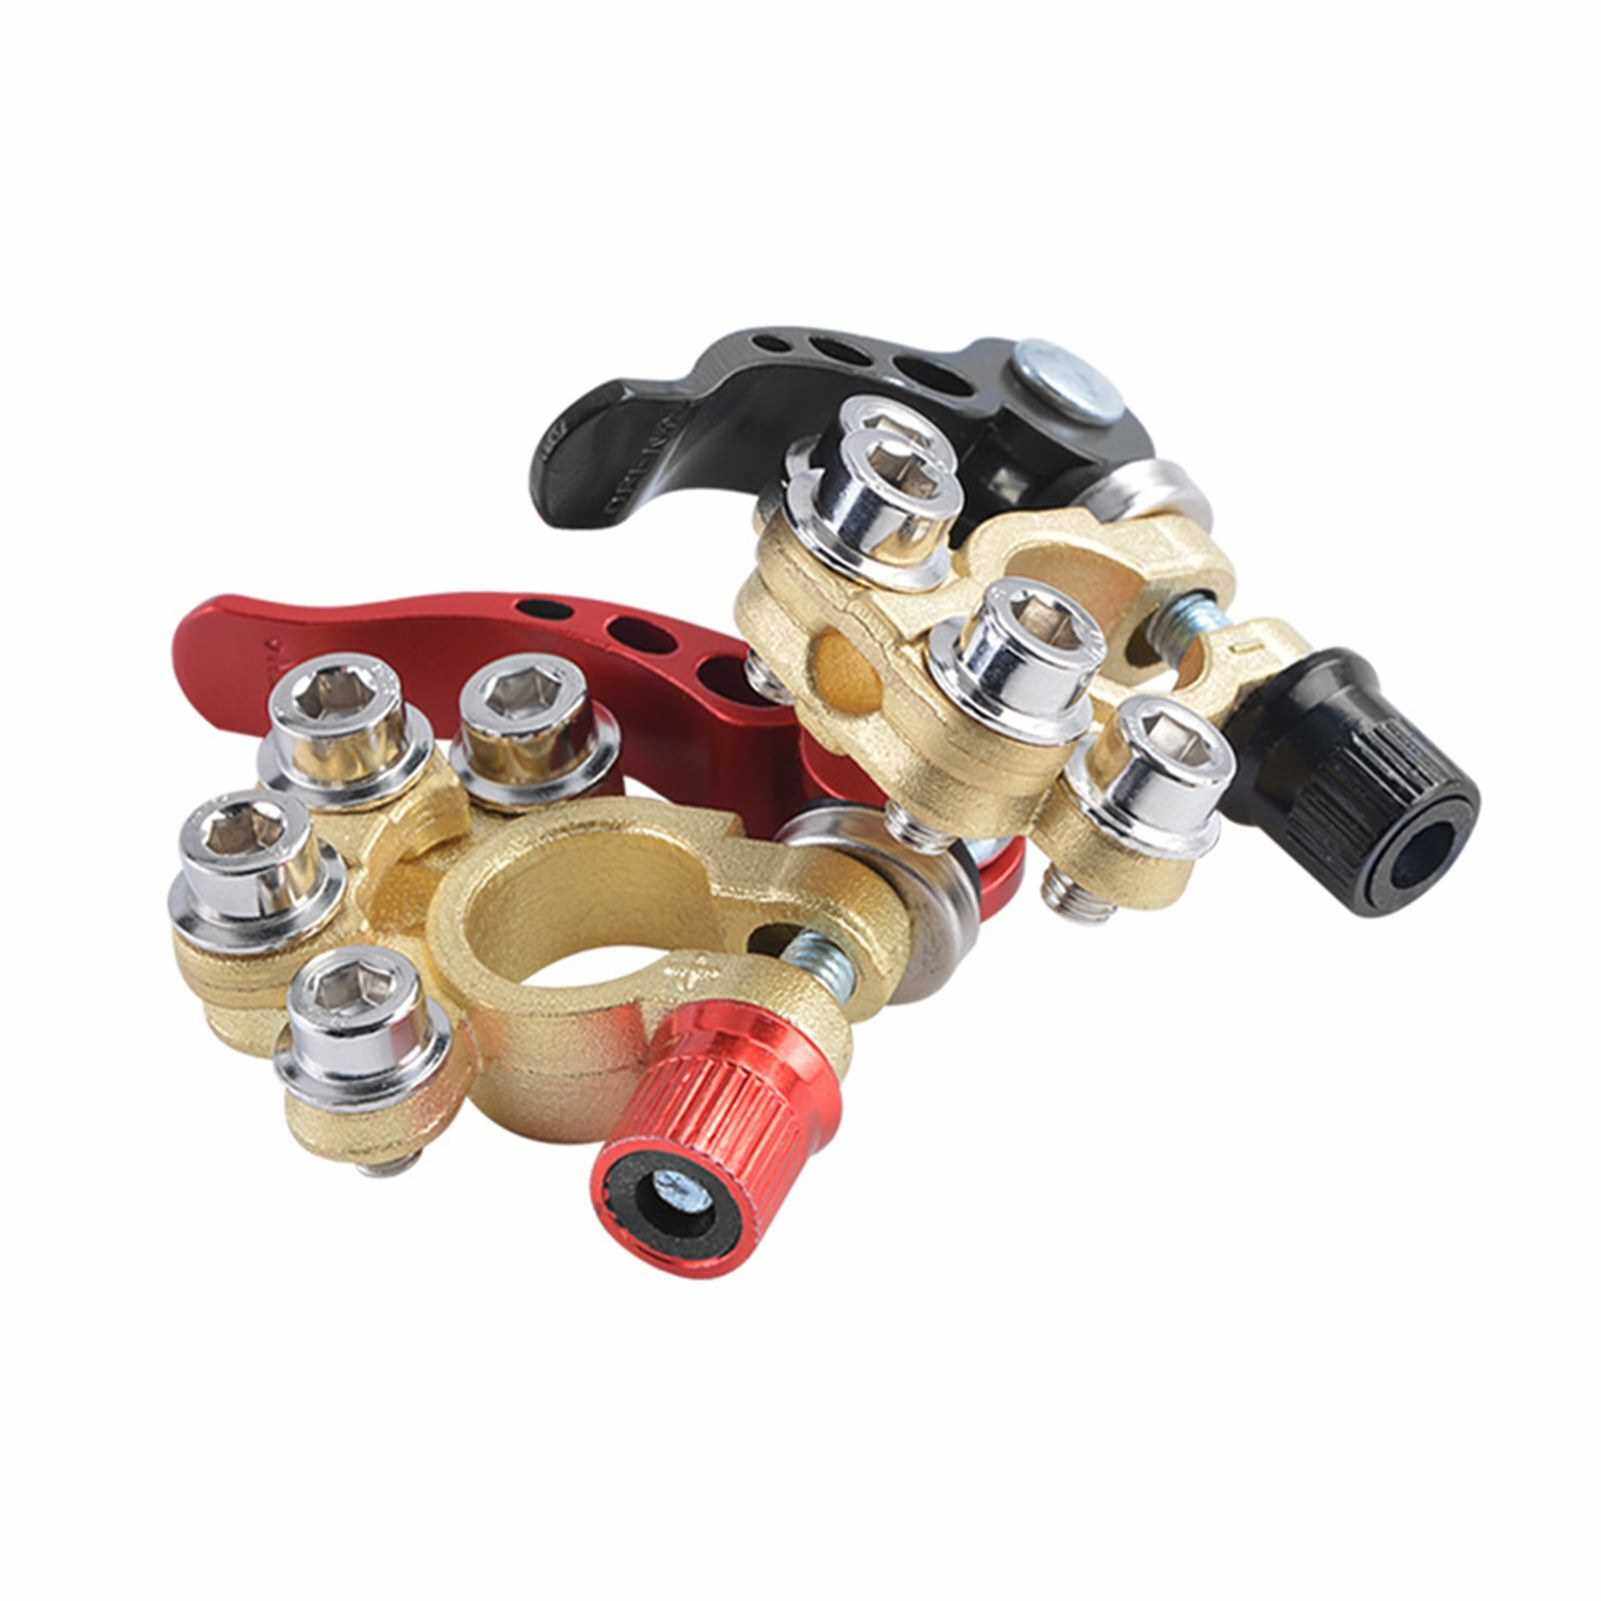 1 Pair Brass Material Automotive Car Top Post Battery Terminals Wire Cable Clamp Terminal Connectors Car Accessories (Standard)